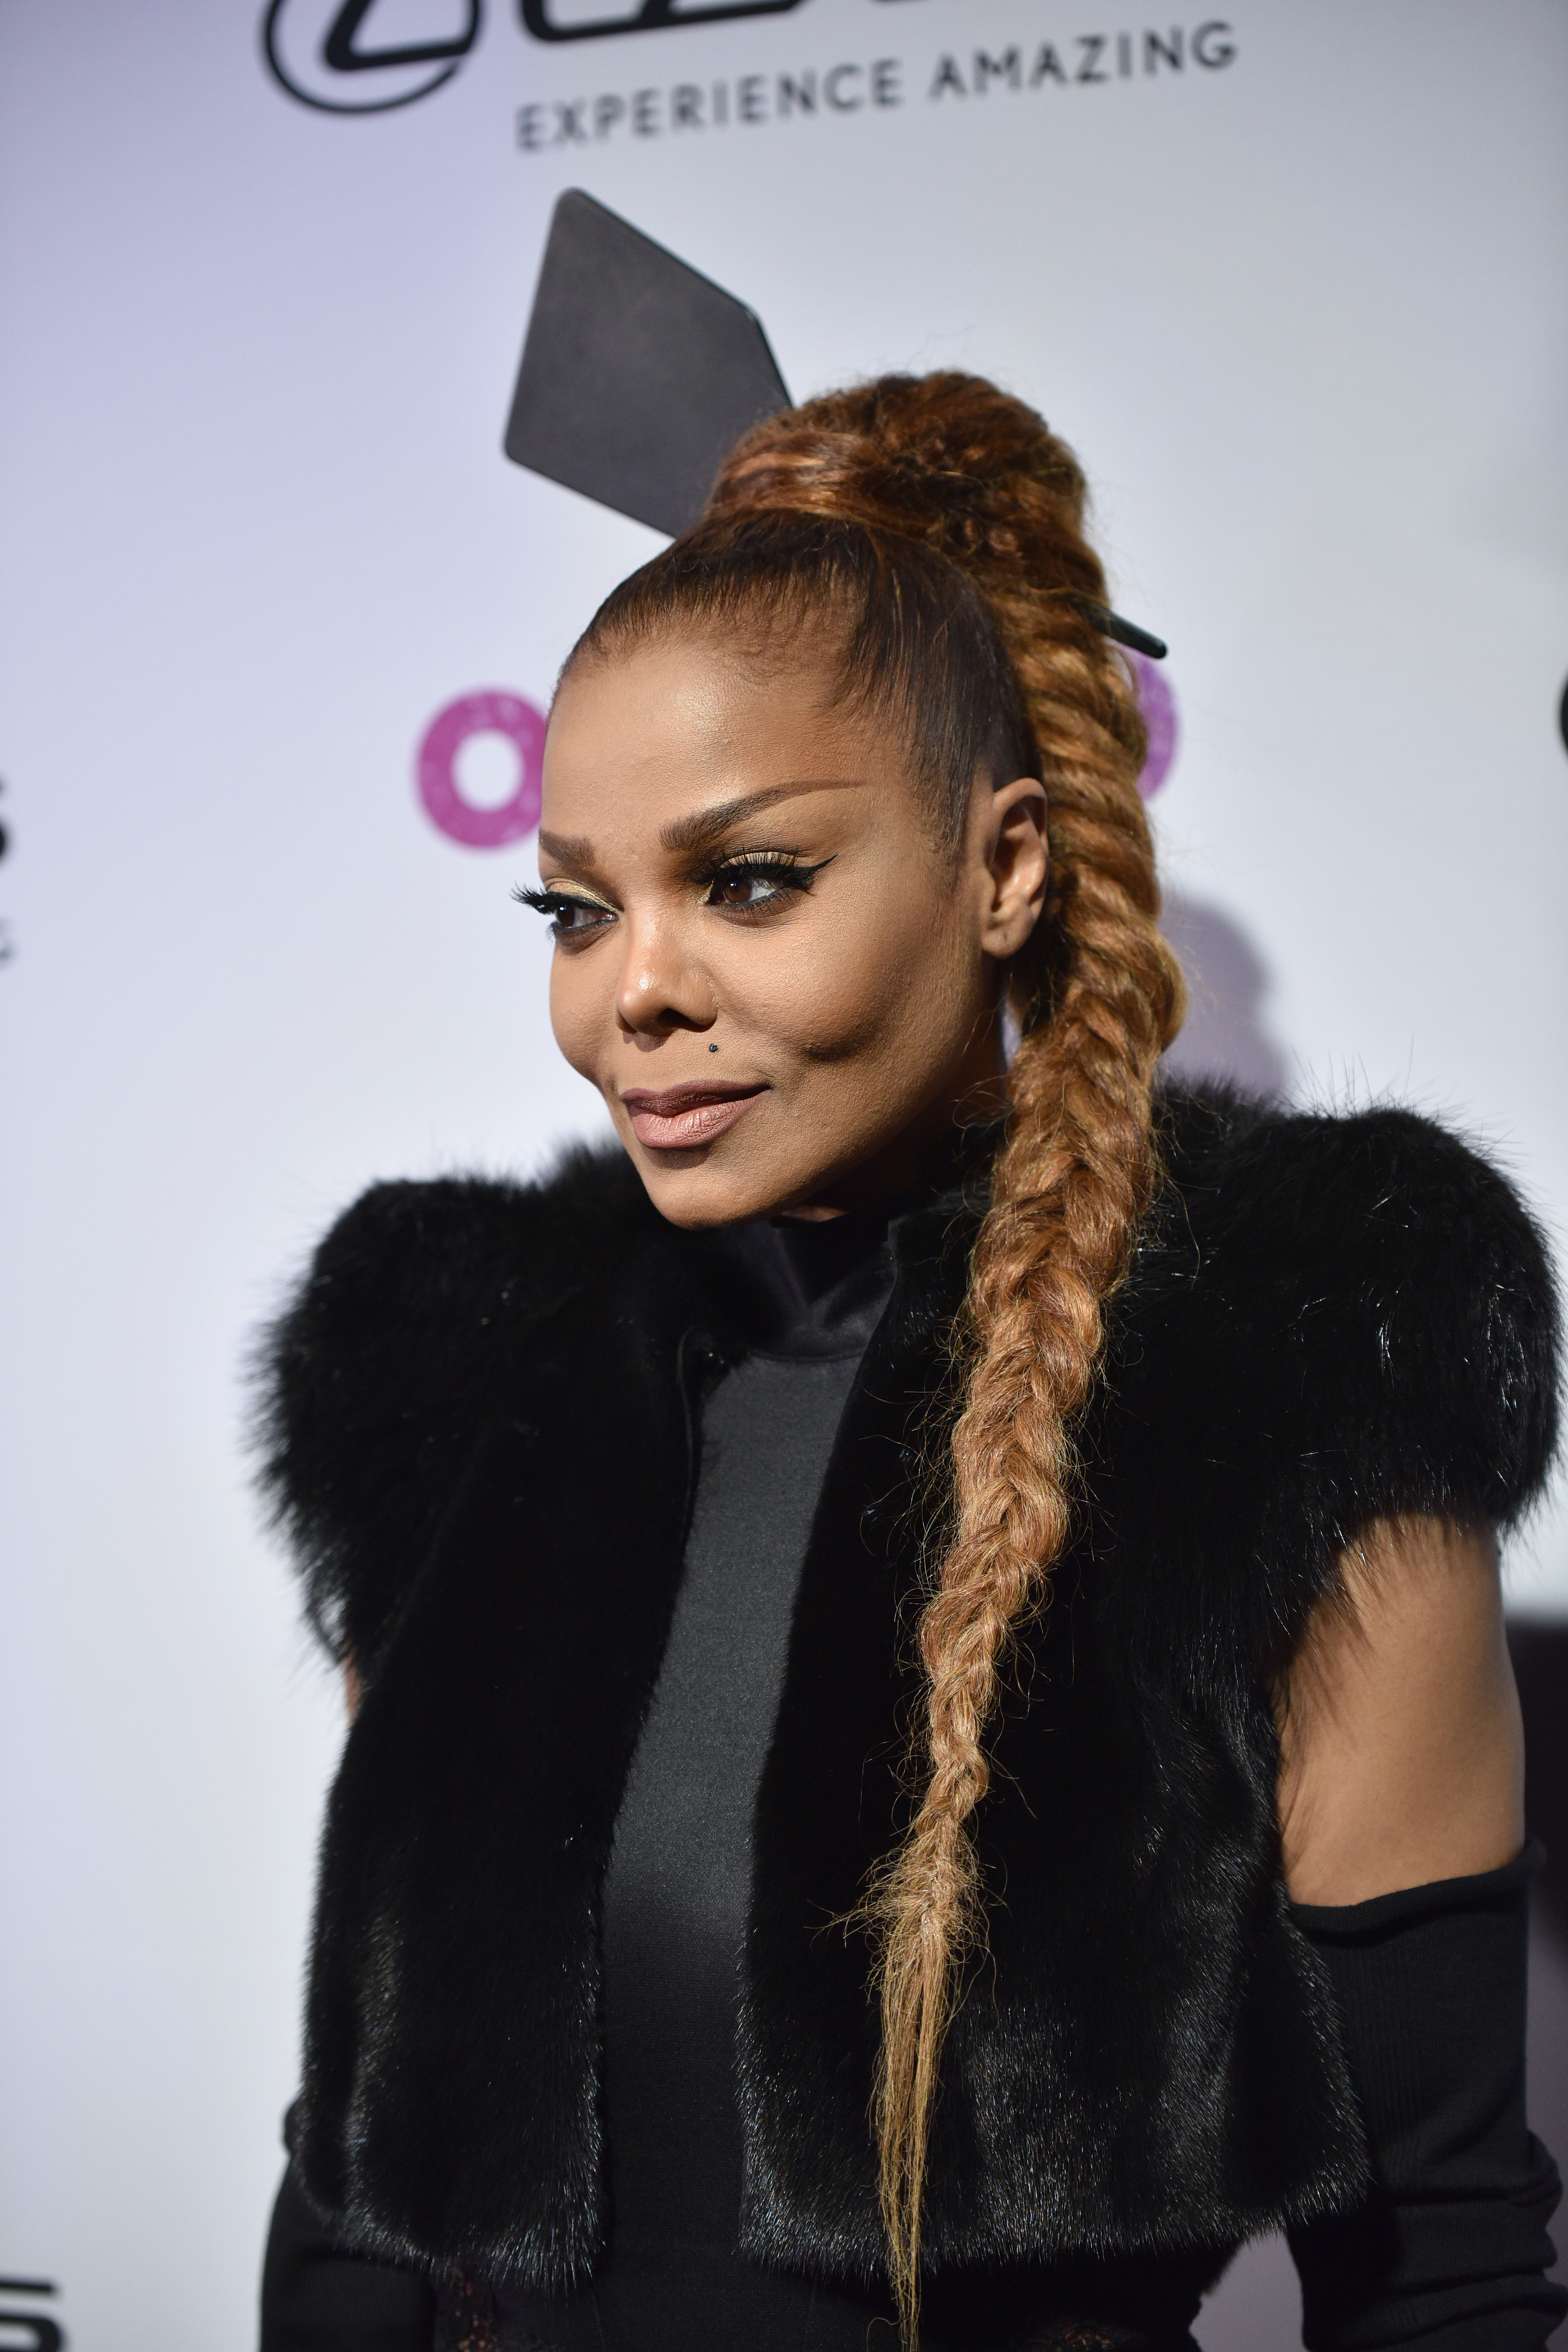 Janet Jackson attends OUT Magazine's #OUT100 event at the the Altman Building on November 9, 2017 in New York City. | Source: Getty Images